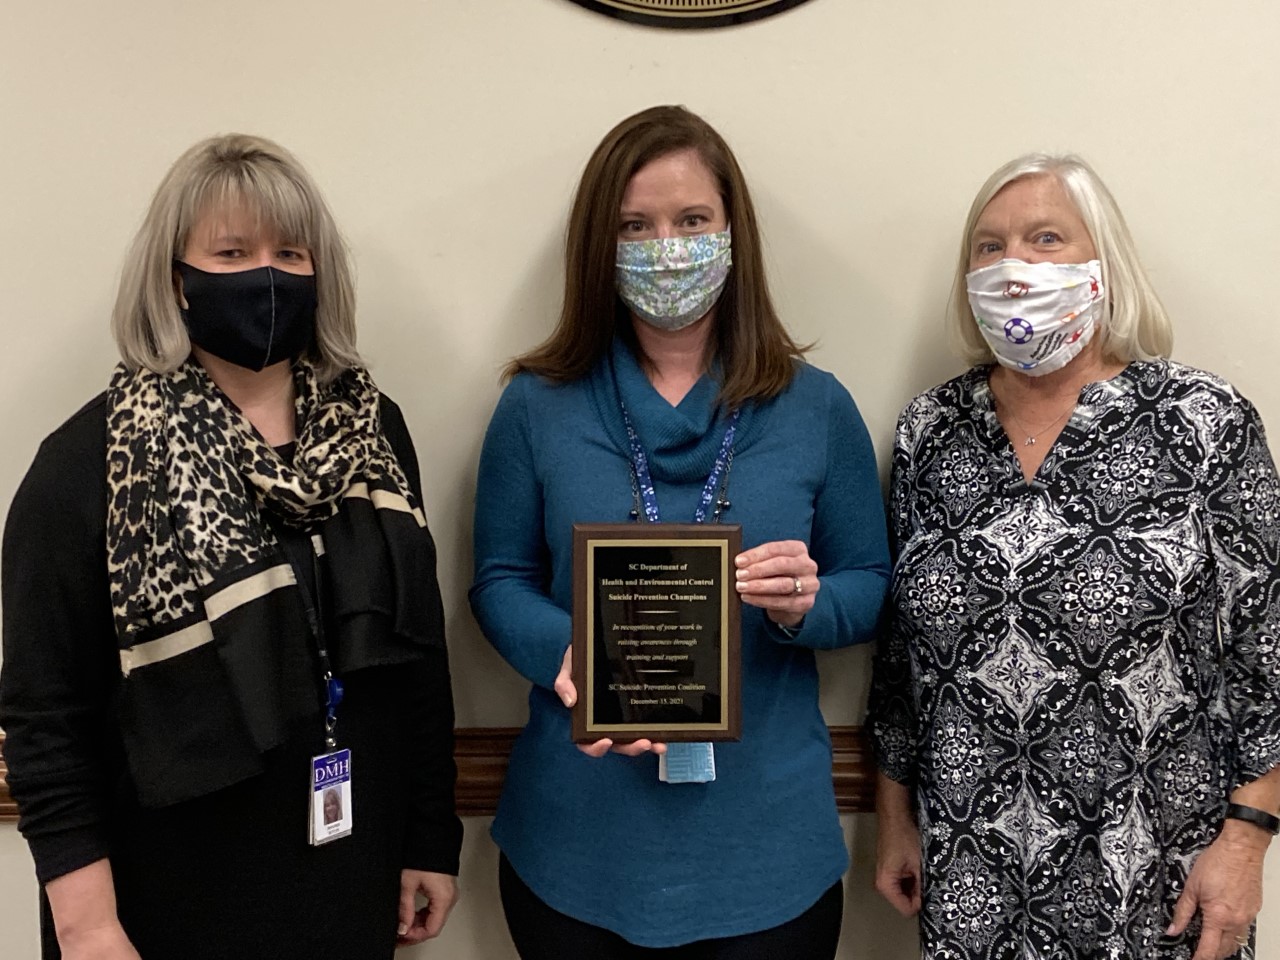 Pictured above from left to right: Jennifer Butler (SC Dept. of Mental Health), Kacey Schmitt, and Vanessa Riley.